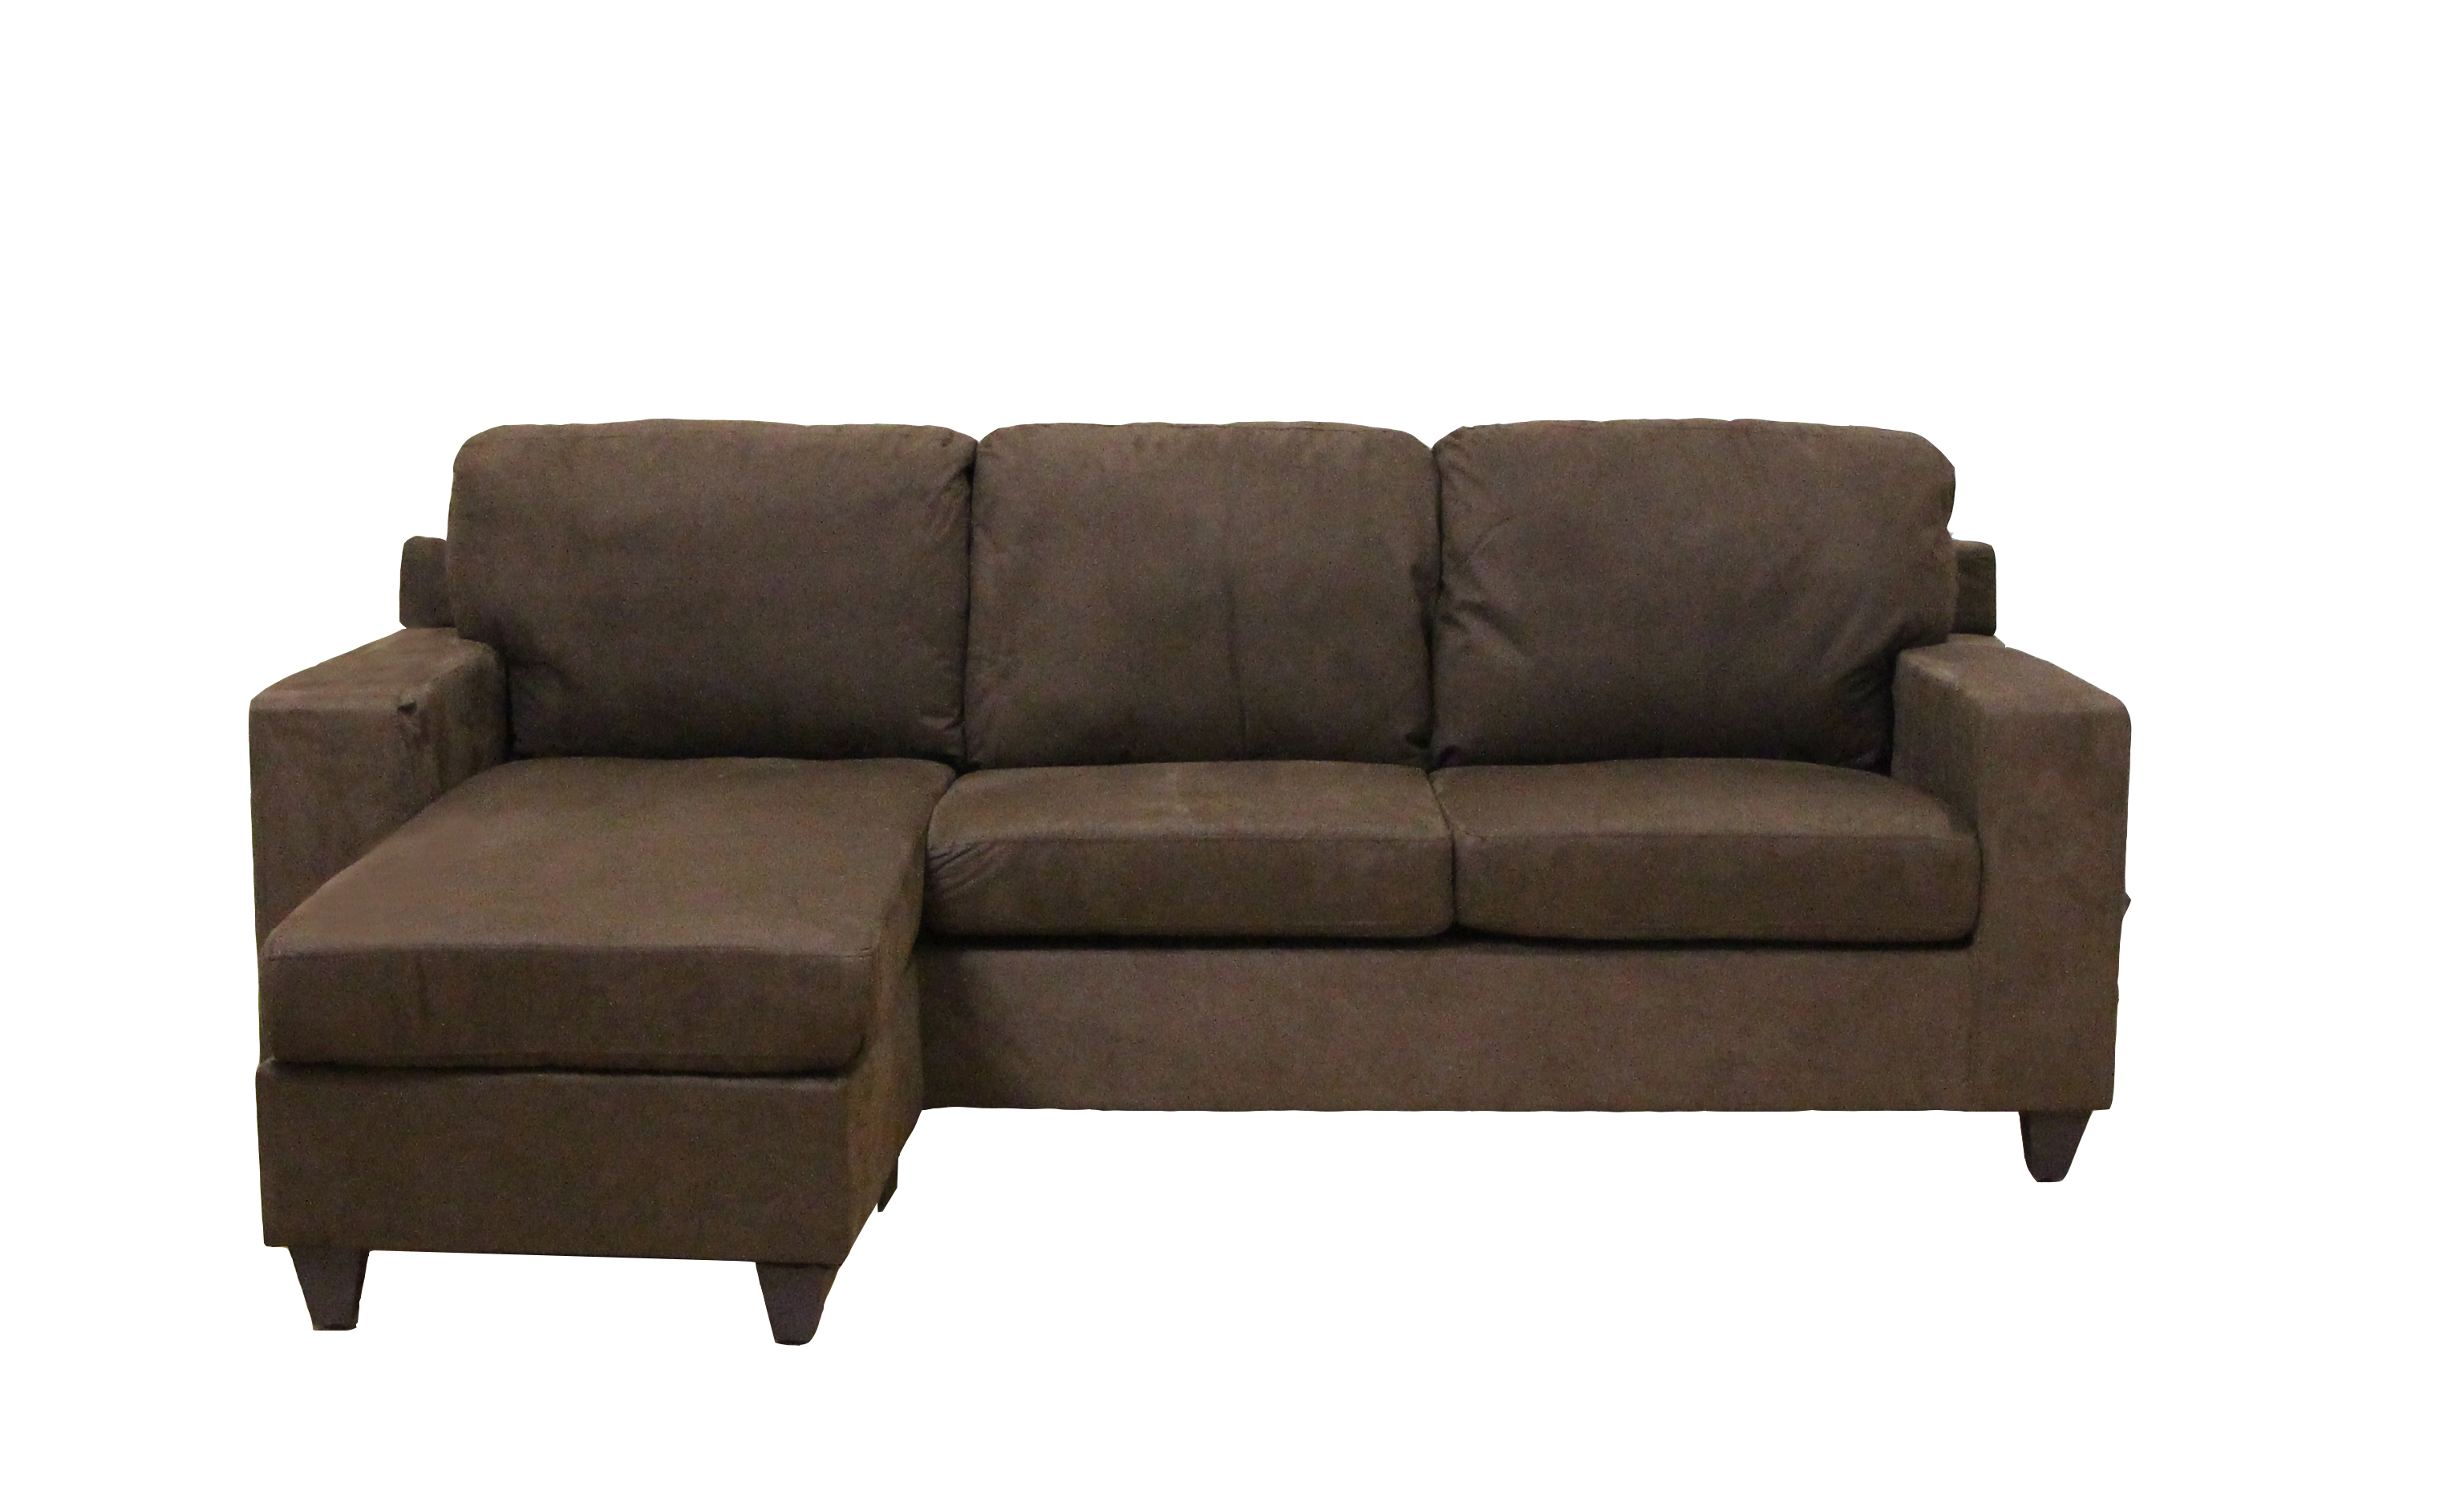 Acme Vogue Microfiber Reversible Chaise Sectional Sofa, Multiple Colors - image 2 of 4